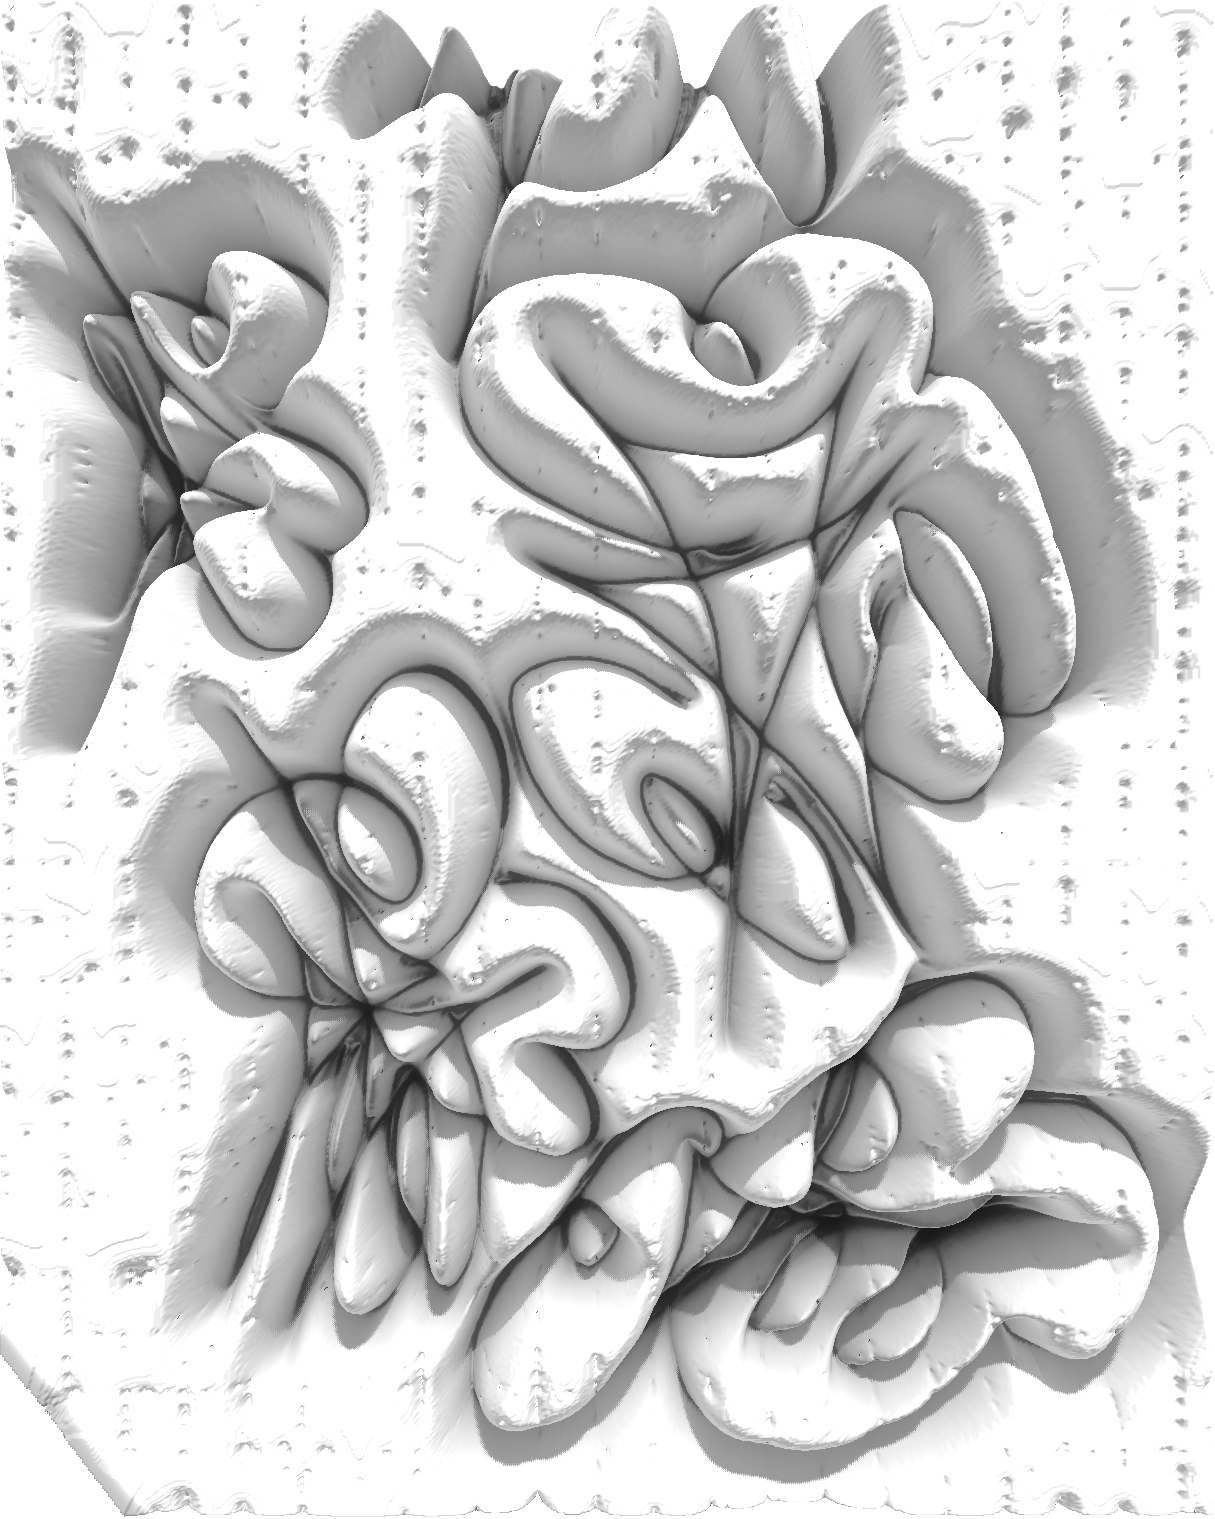 3D extrusion of a scribble with plaster texture